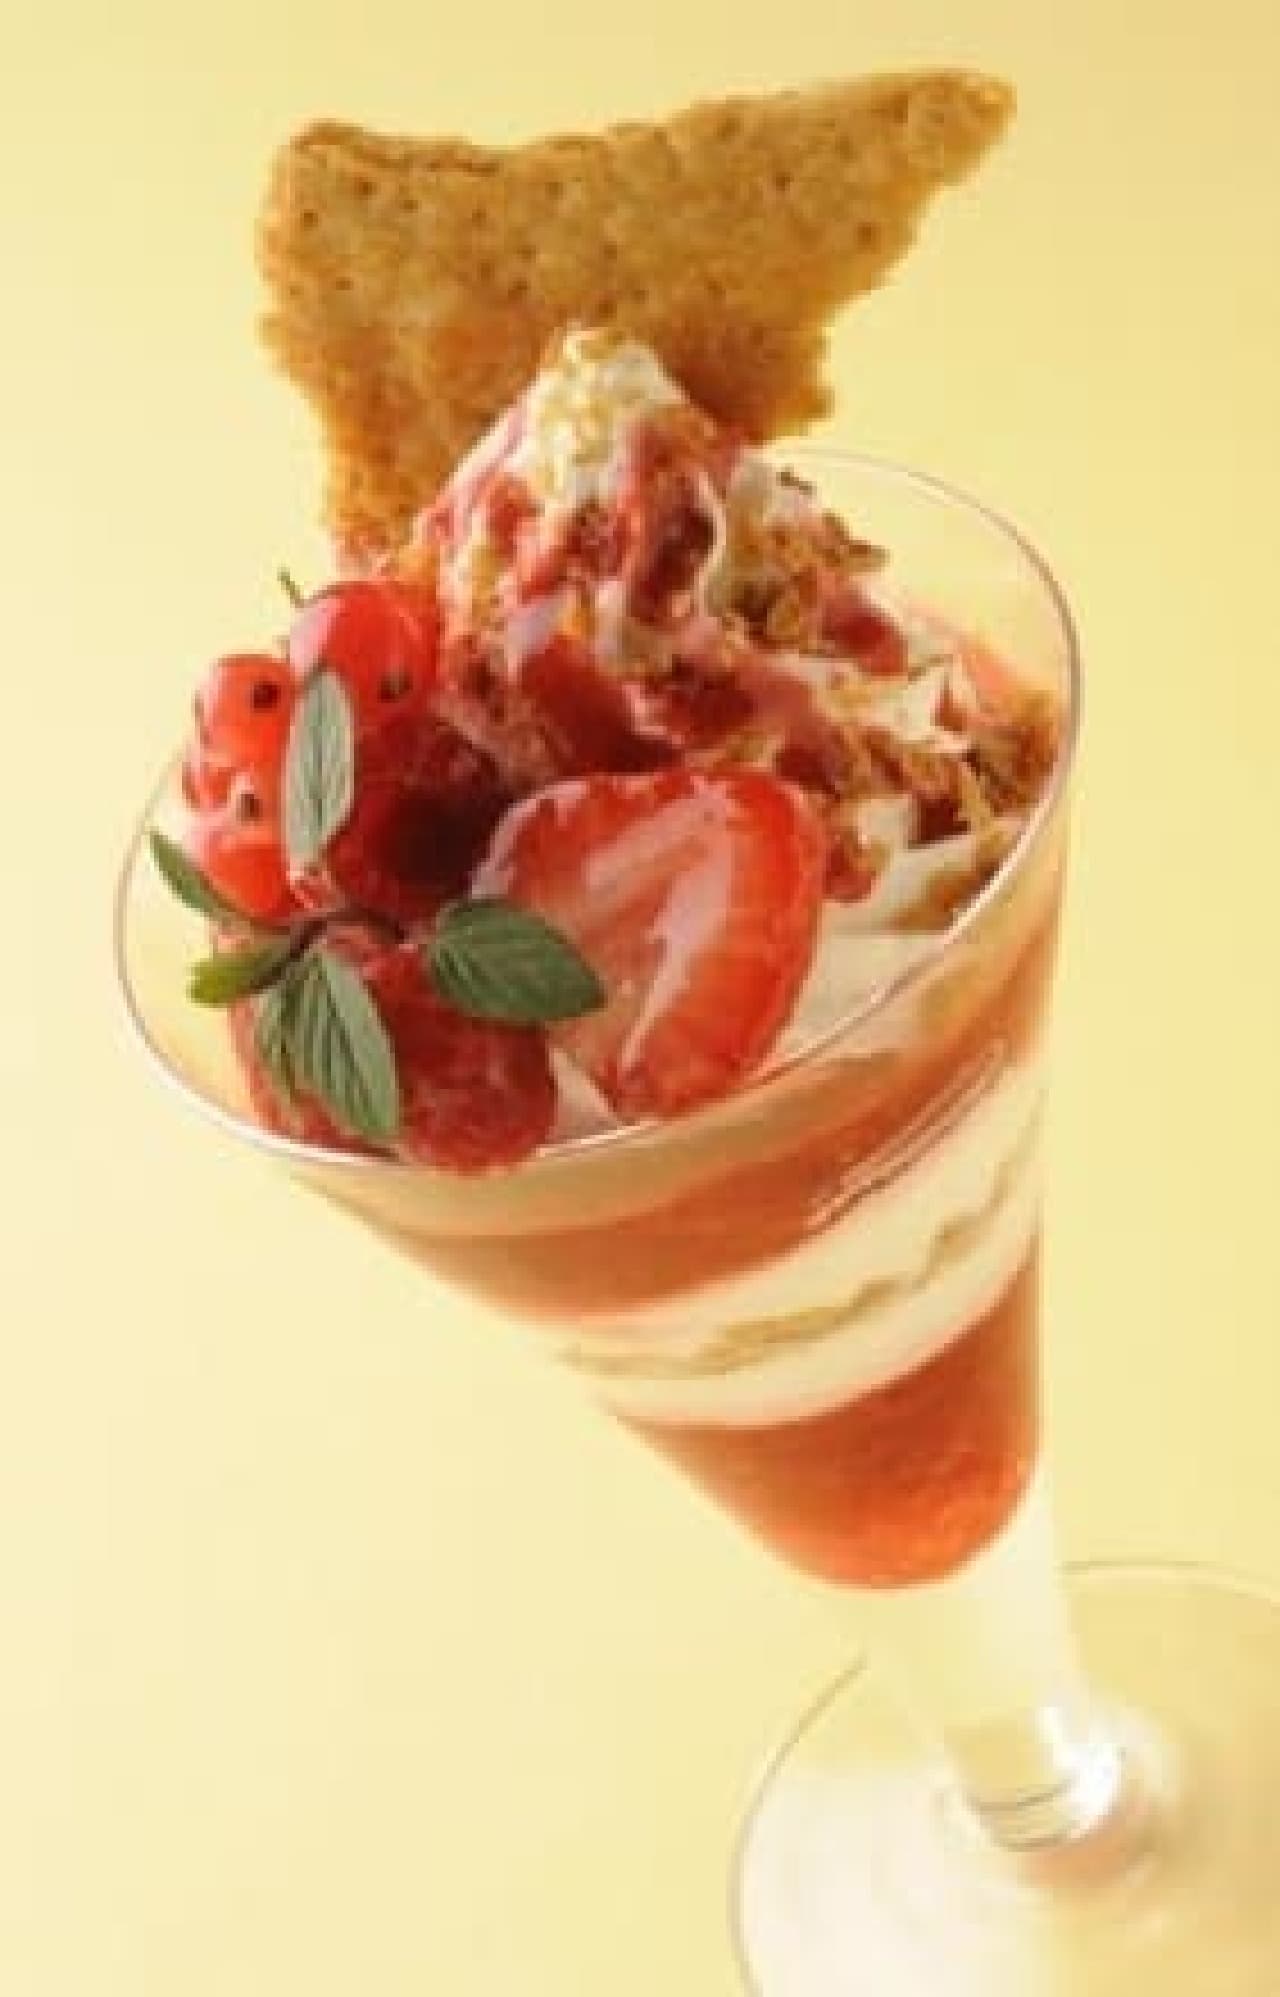 I'm curious about the strawberry day limited parfait! (The image is an image)